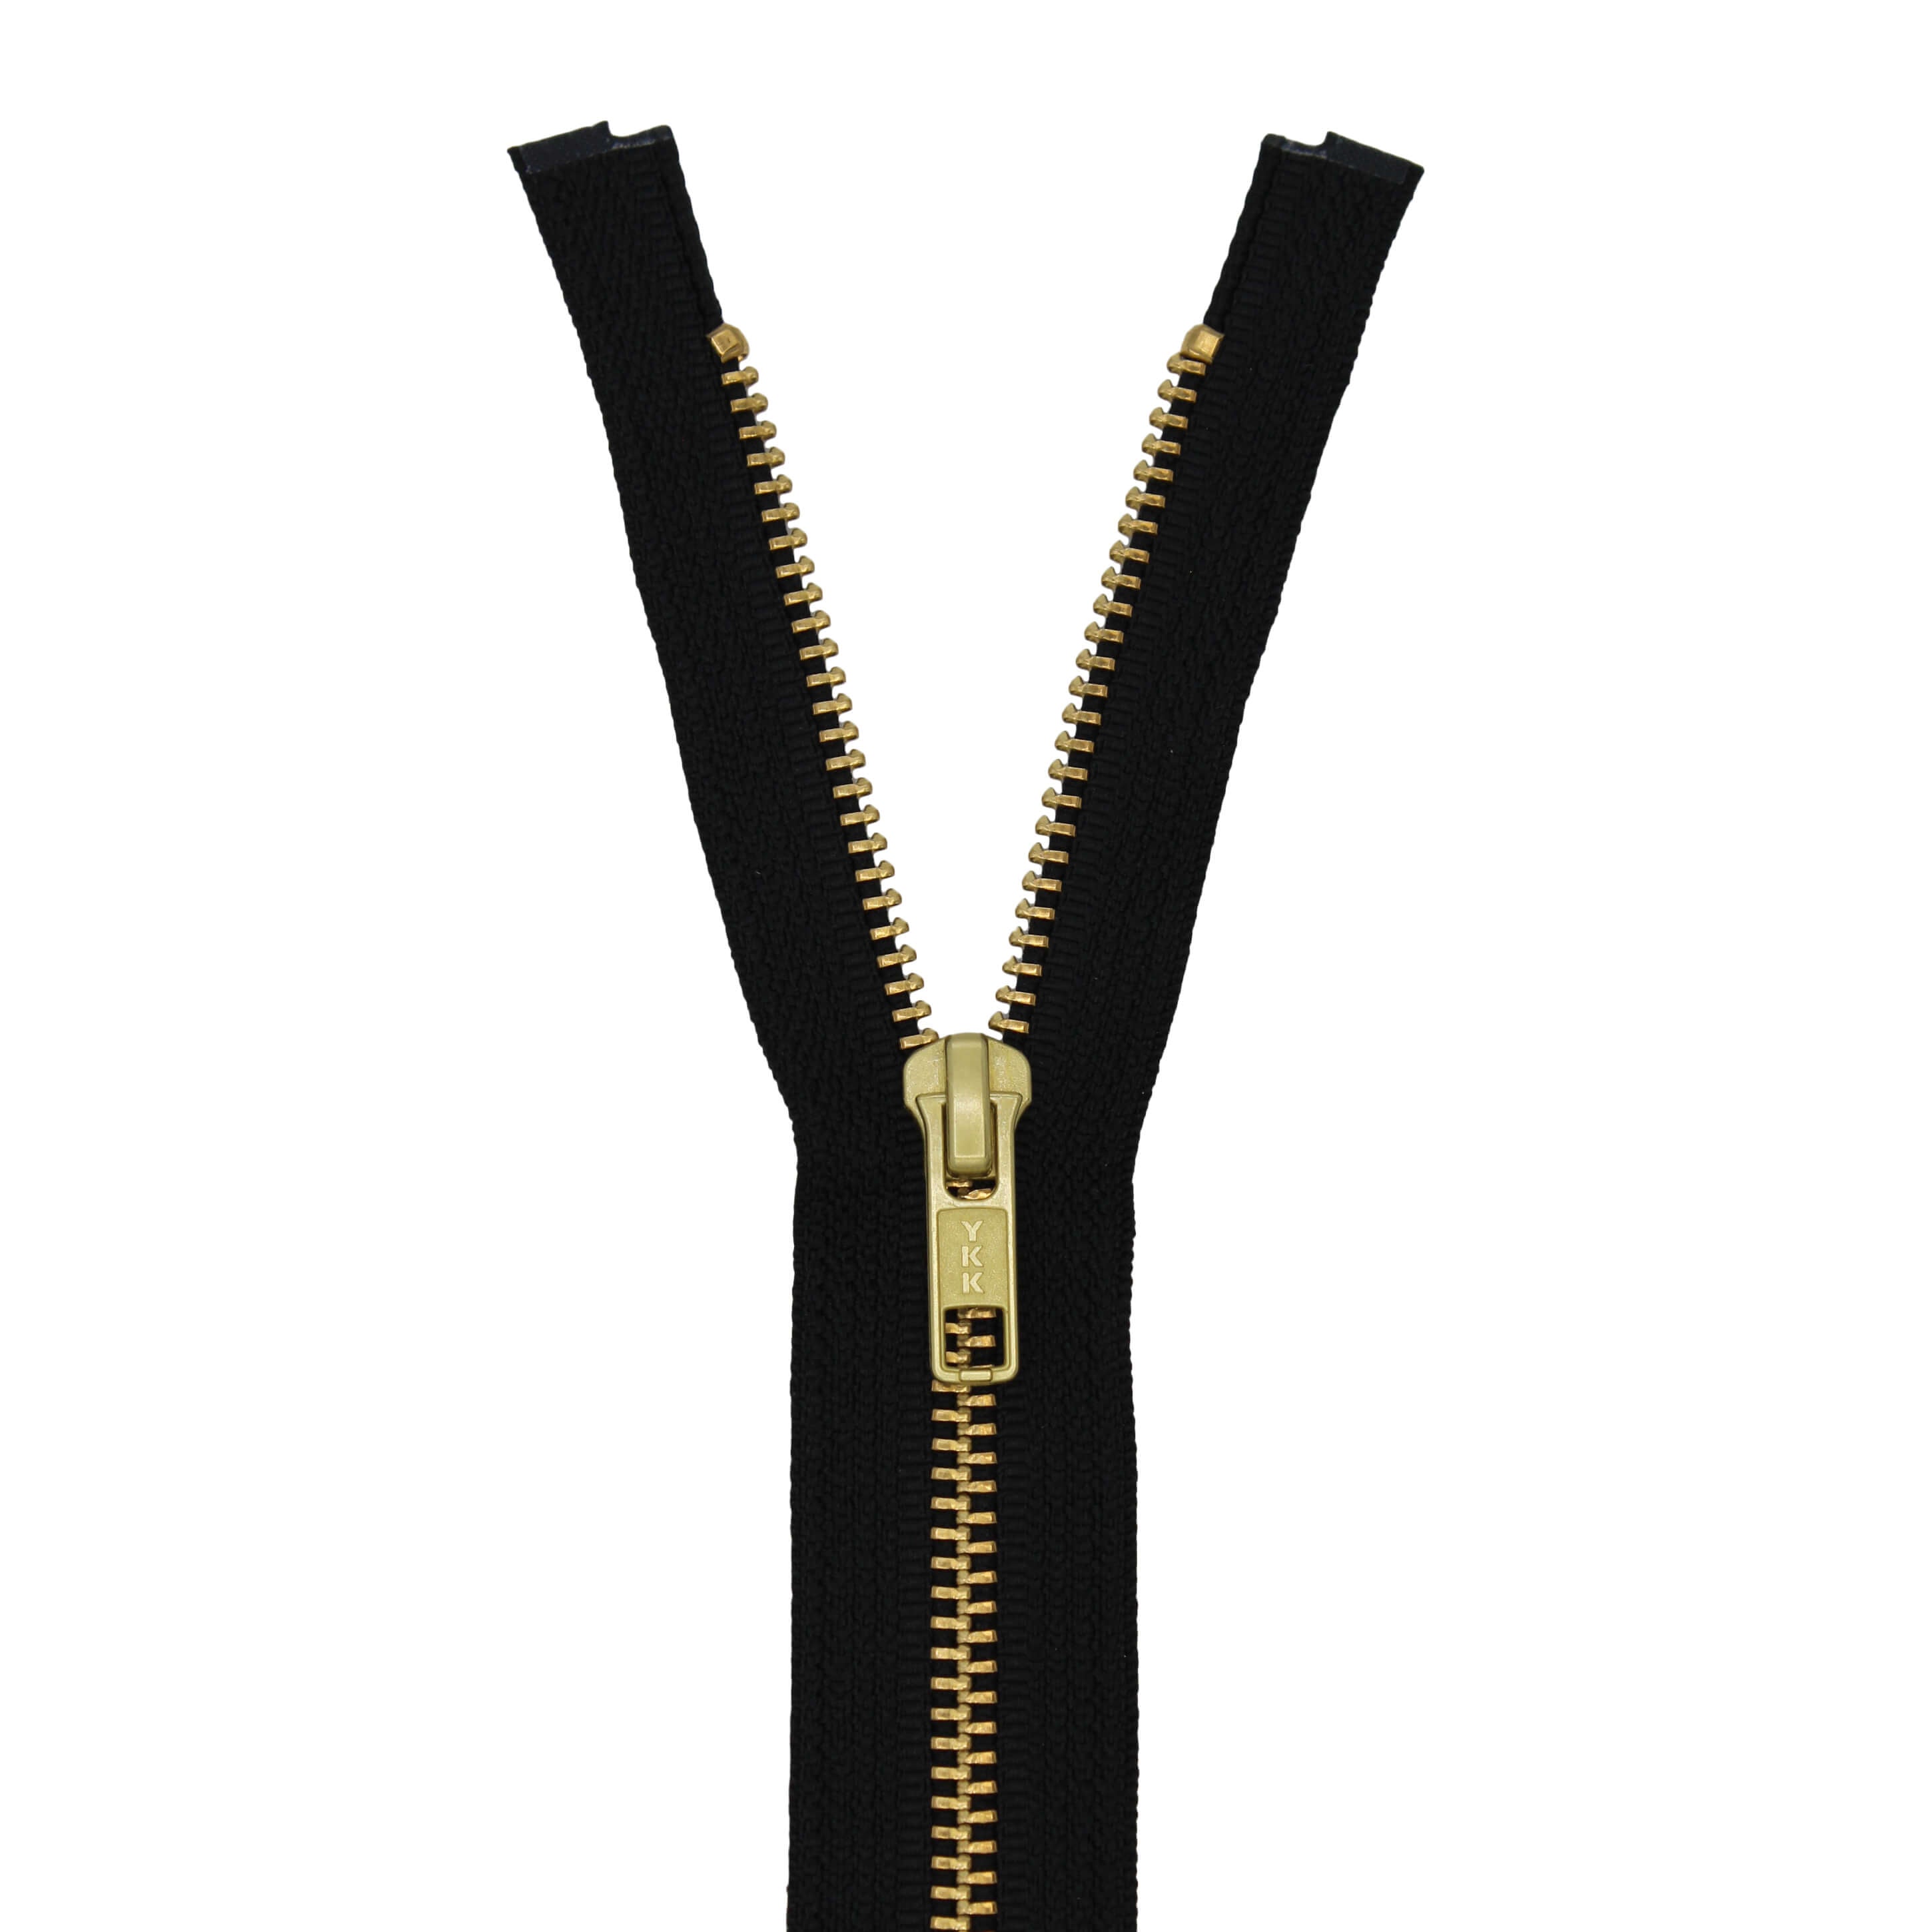 BRASS READY-MADE YKK METAL ZIPPERS – Quality Thread & Notions